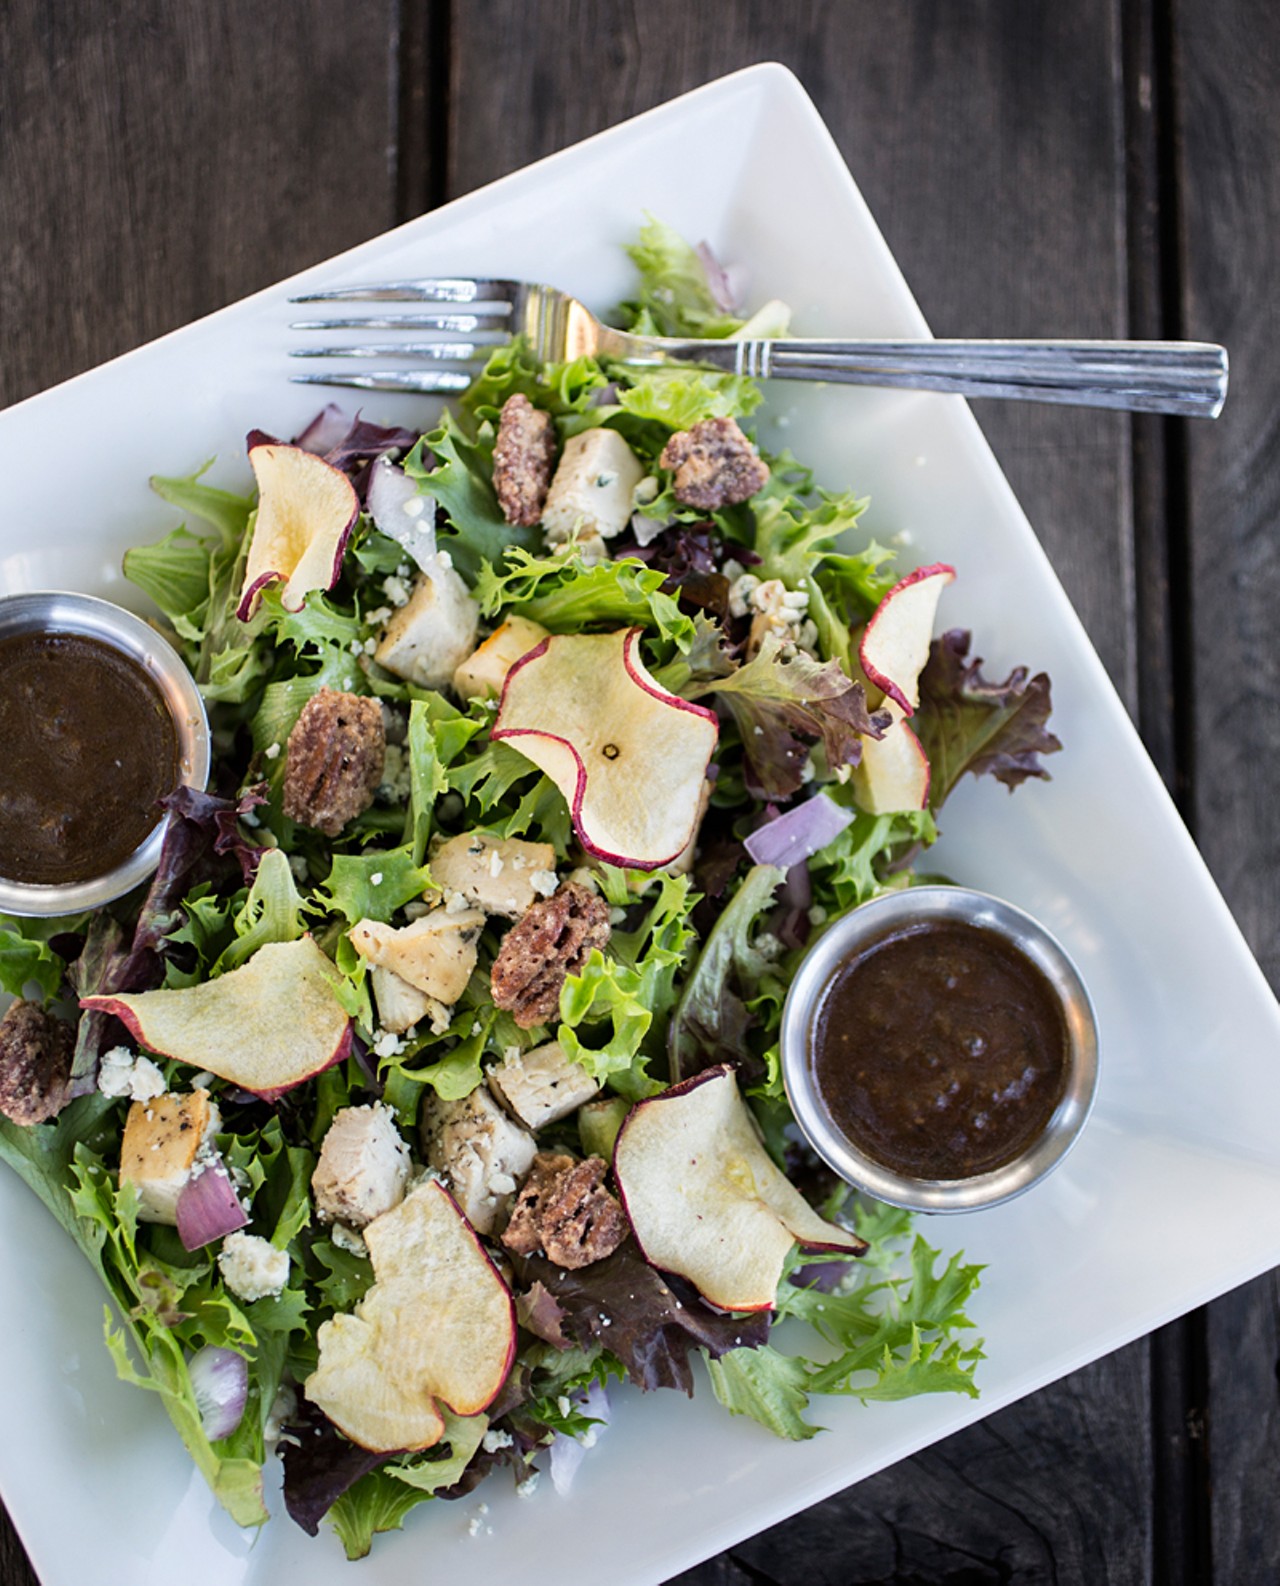 The "Apple Orchard" salad brings garden greens and arcadian lettuce dressed with roasted chicken, red onions, apple chips, gorgonzola cheese, sweet pecans and balsamic vinaigrette.